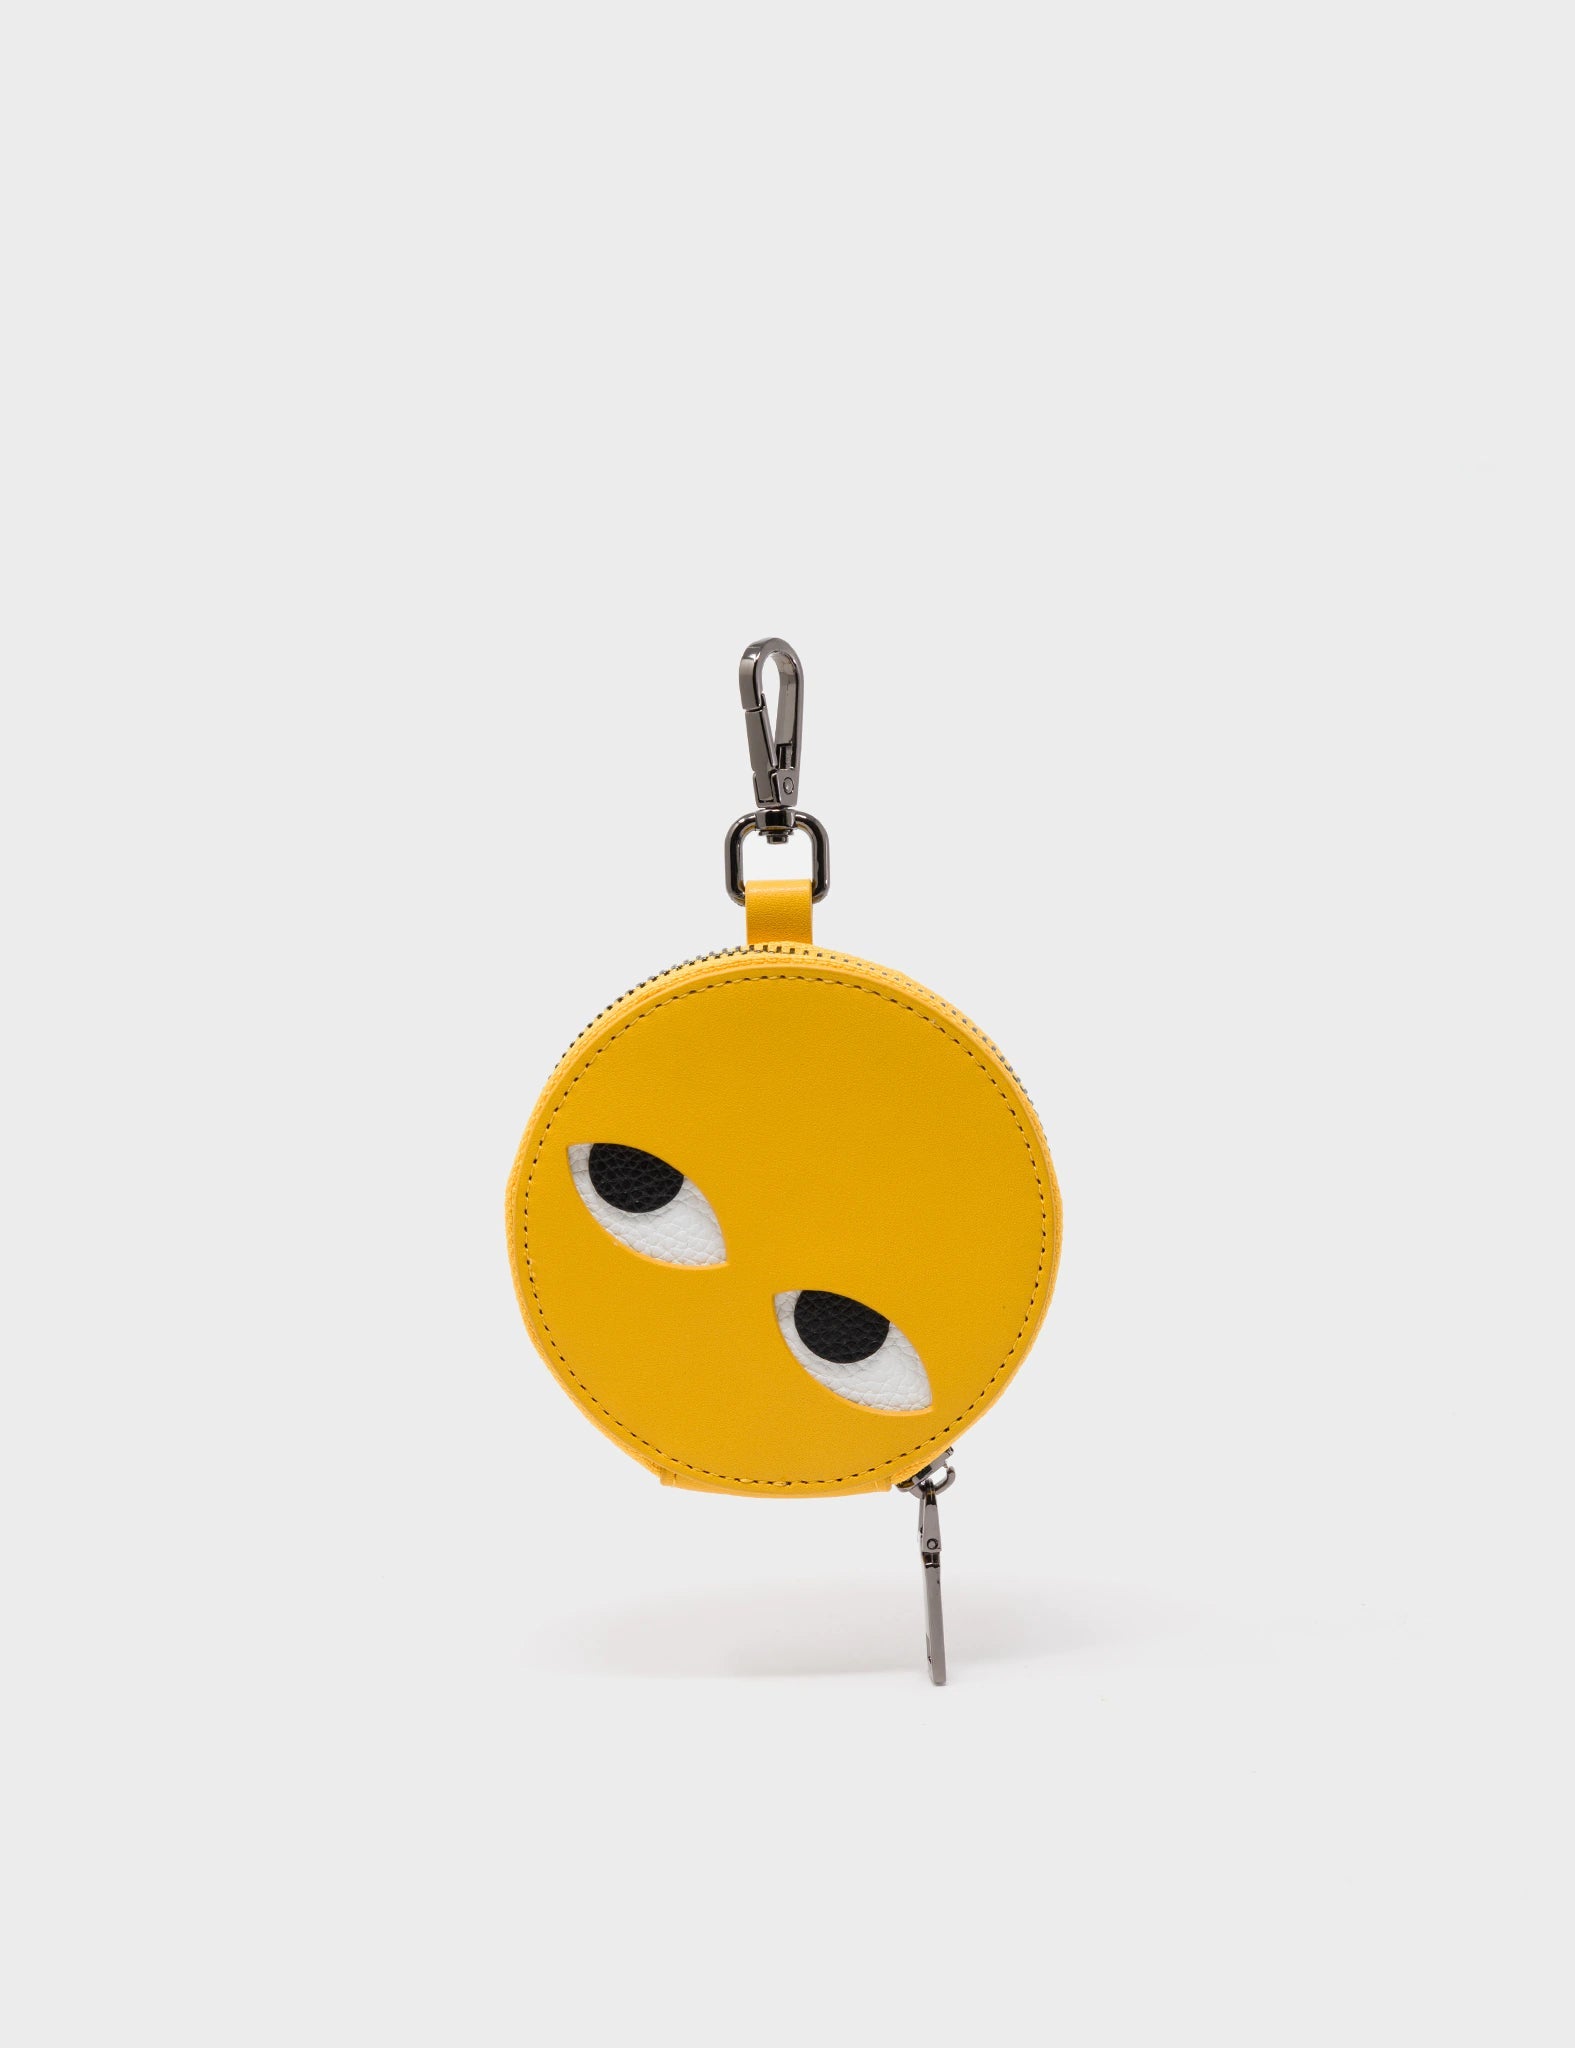 Yellow Leather Pouch Charm - Keychain with Eyes Debossed